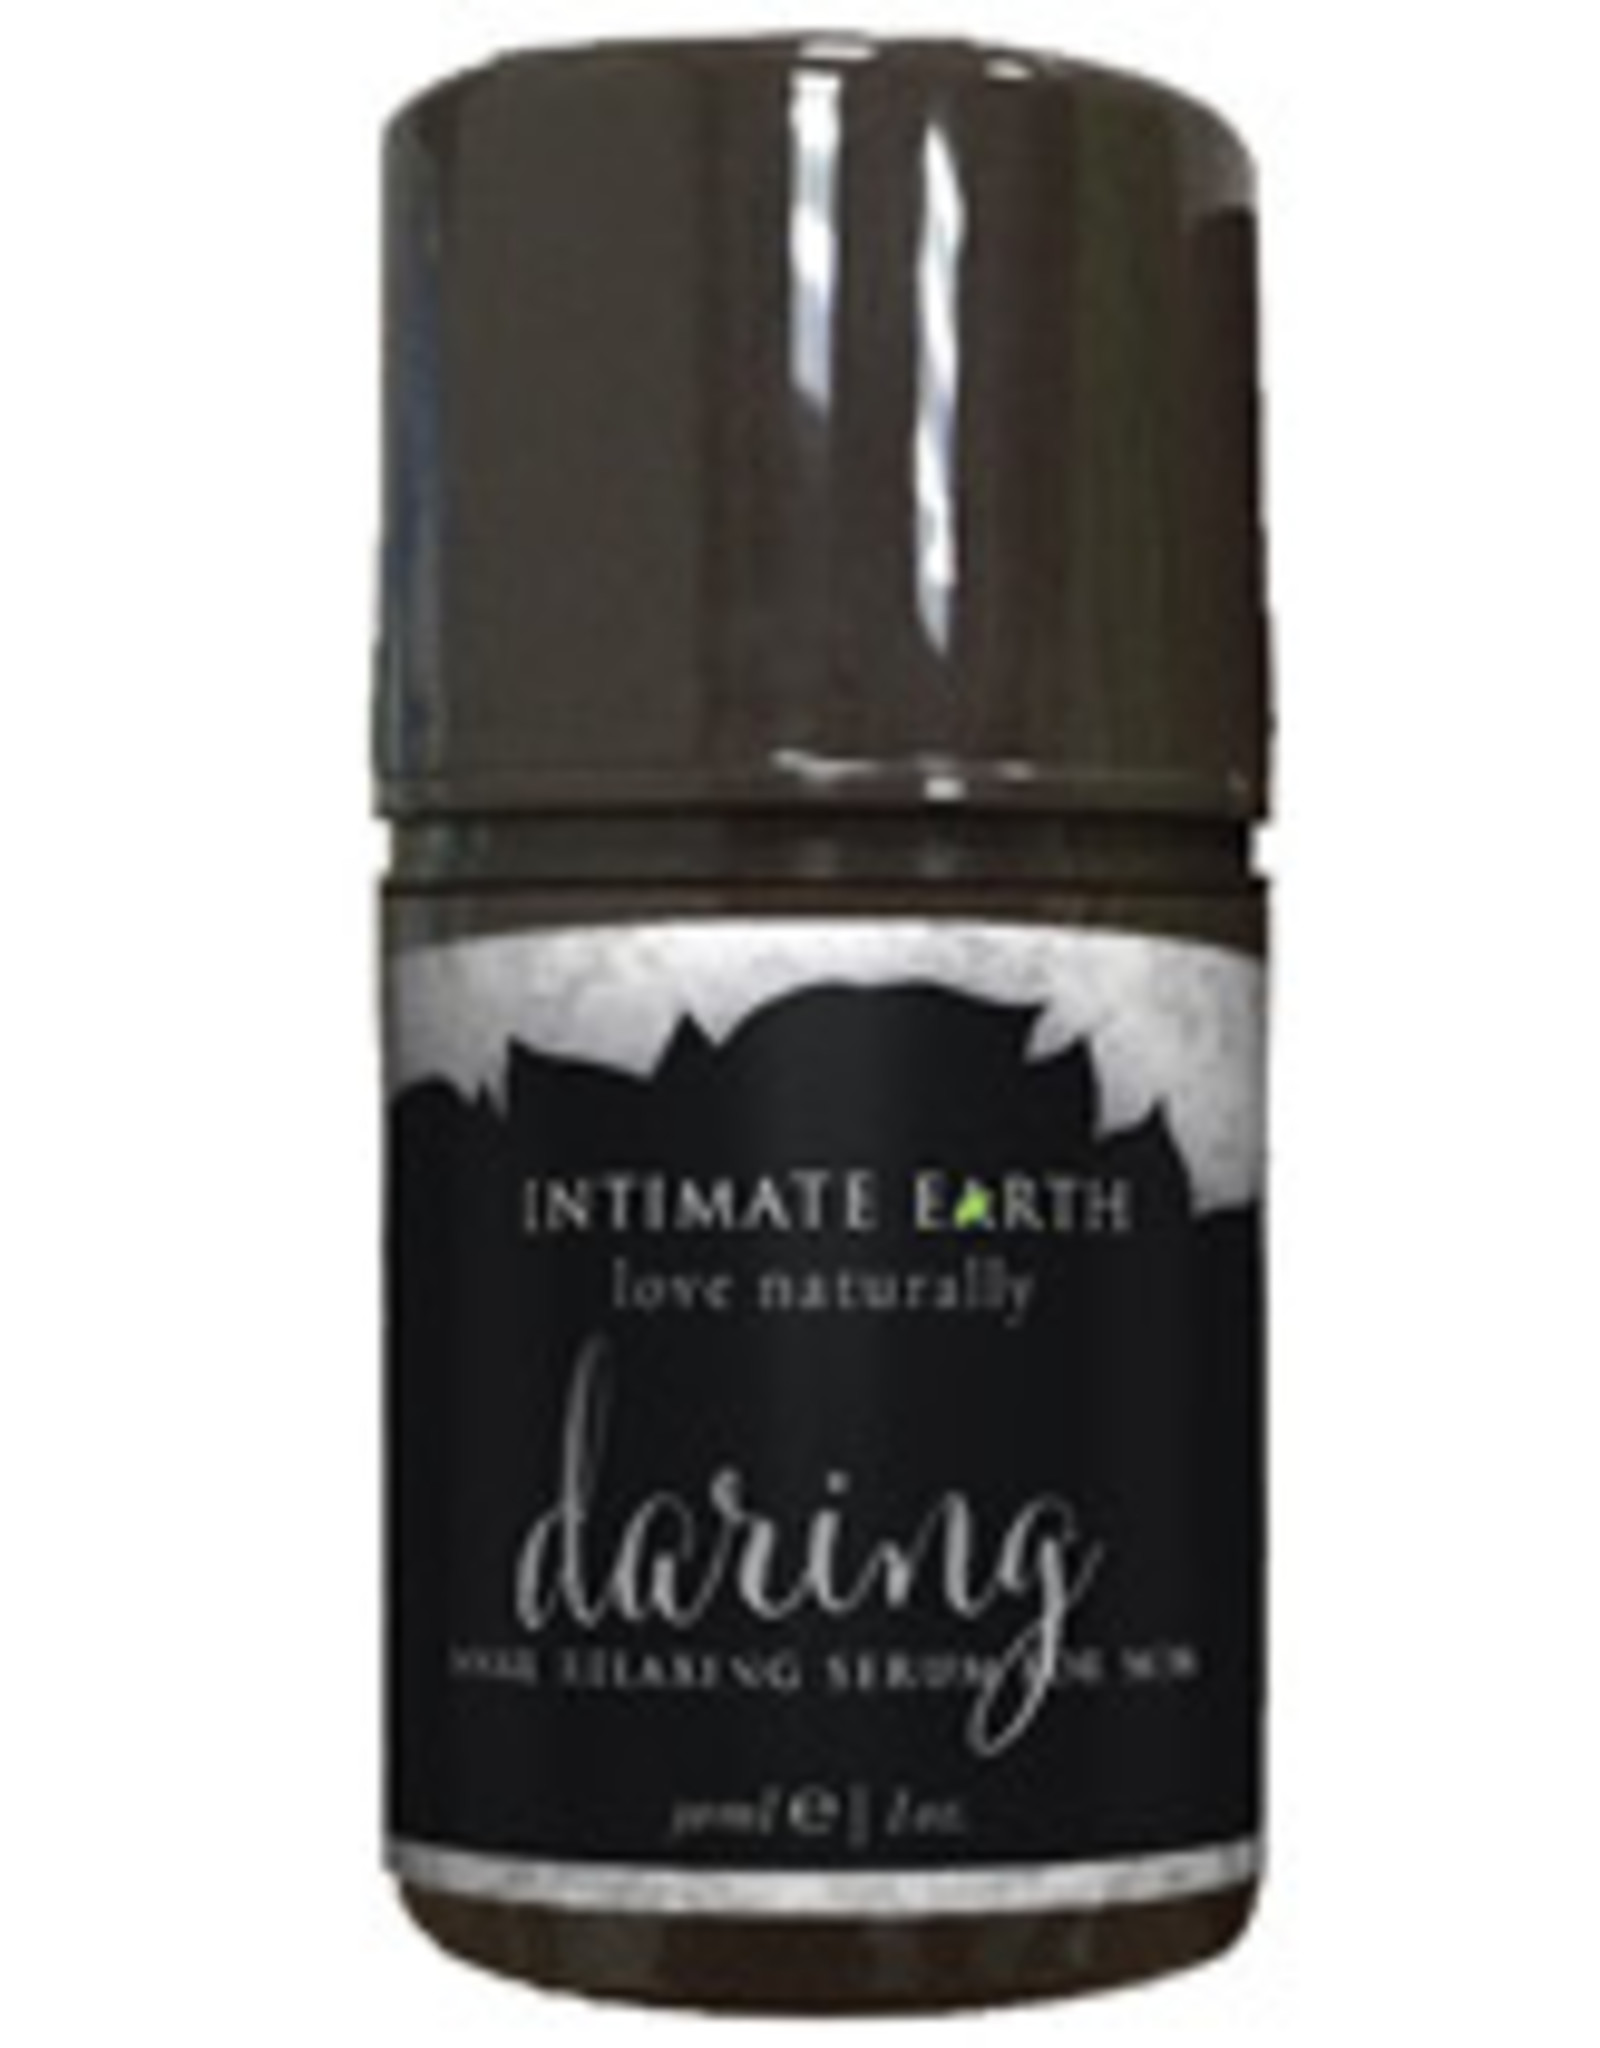 Intimate Earth Daring Anal Relax for Men - 30 ml